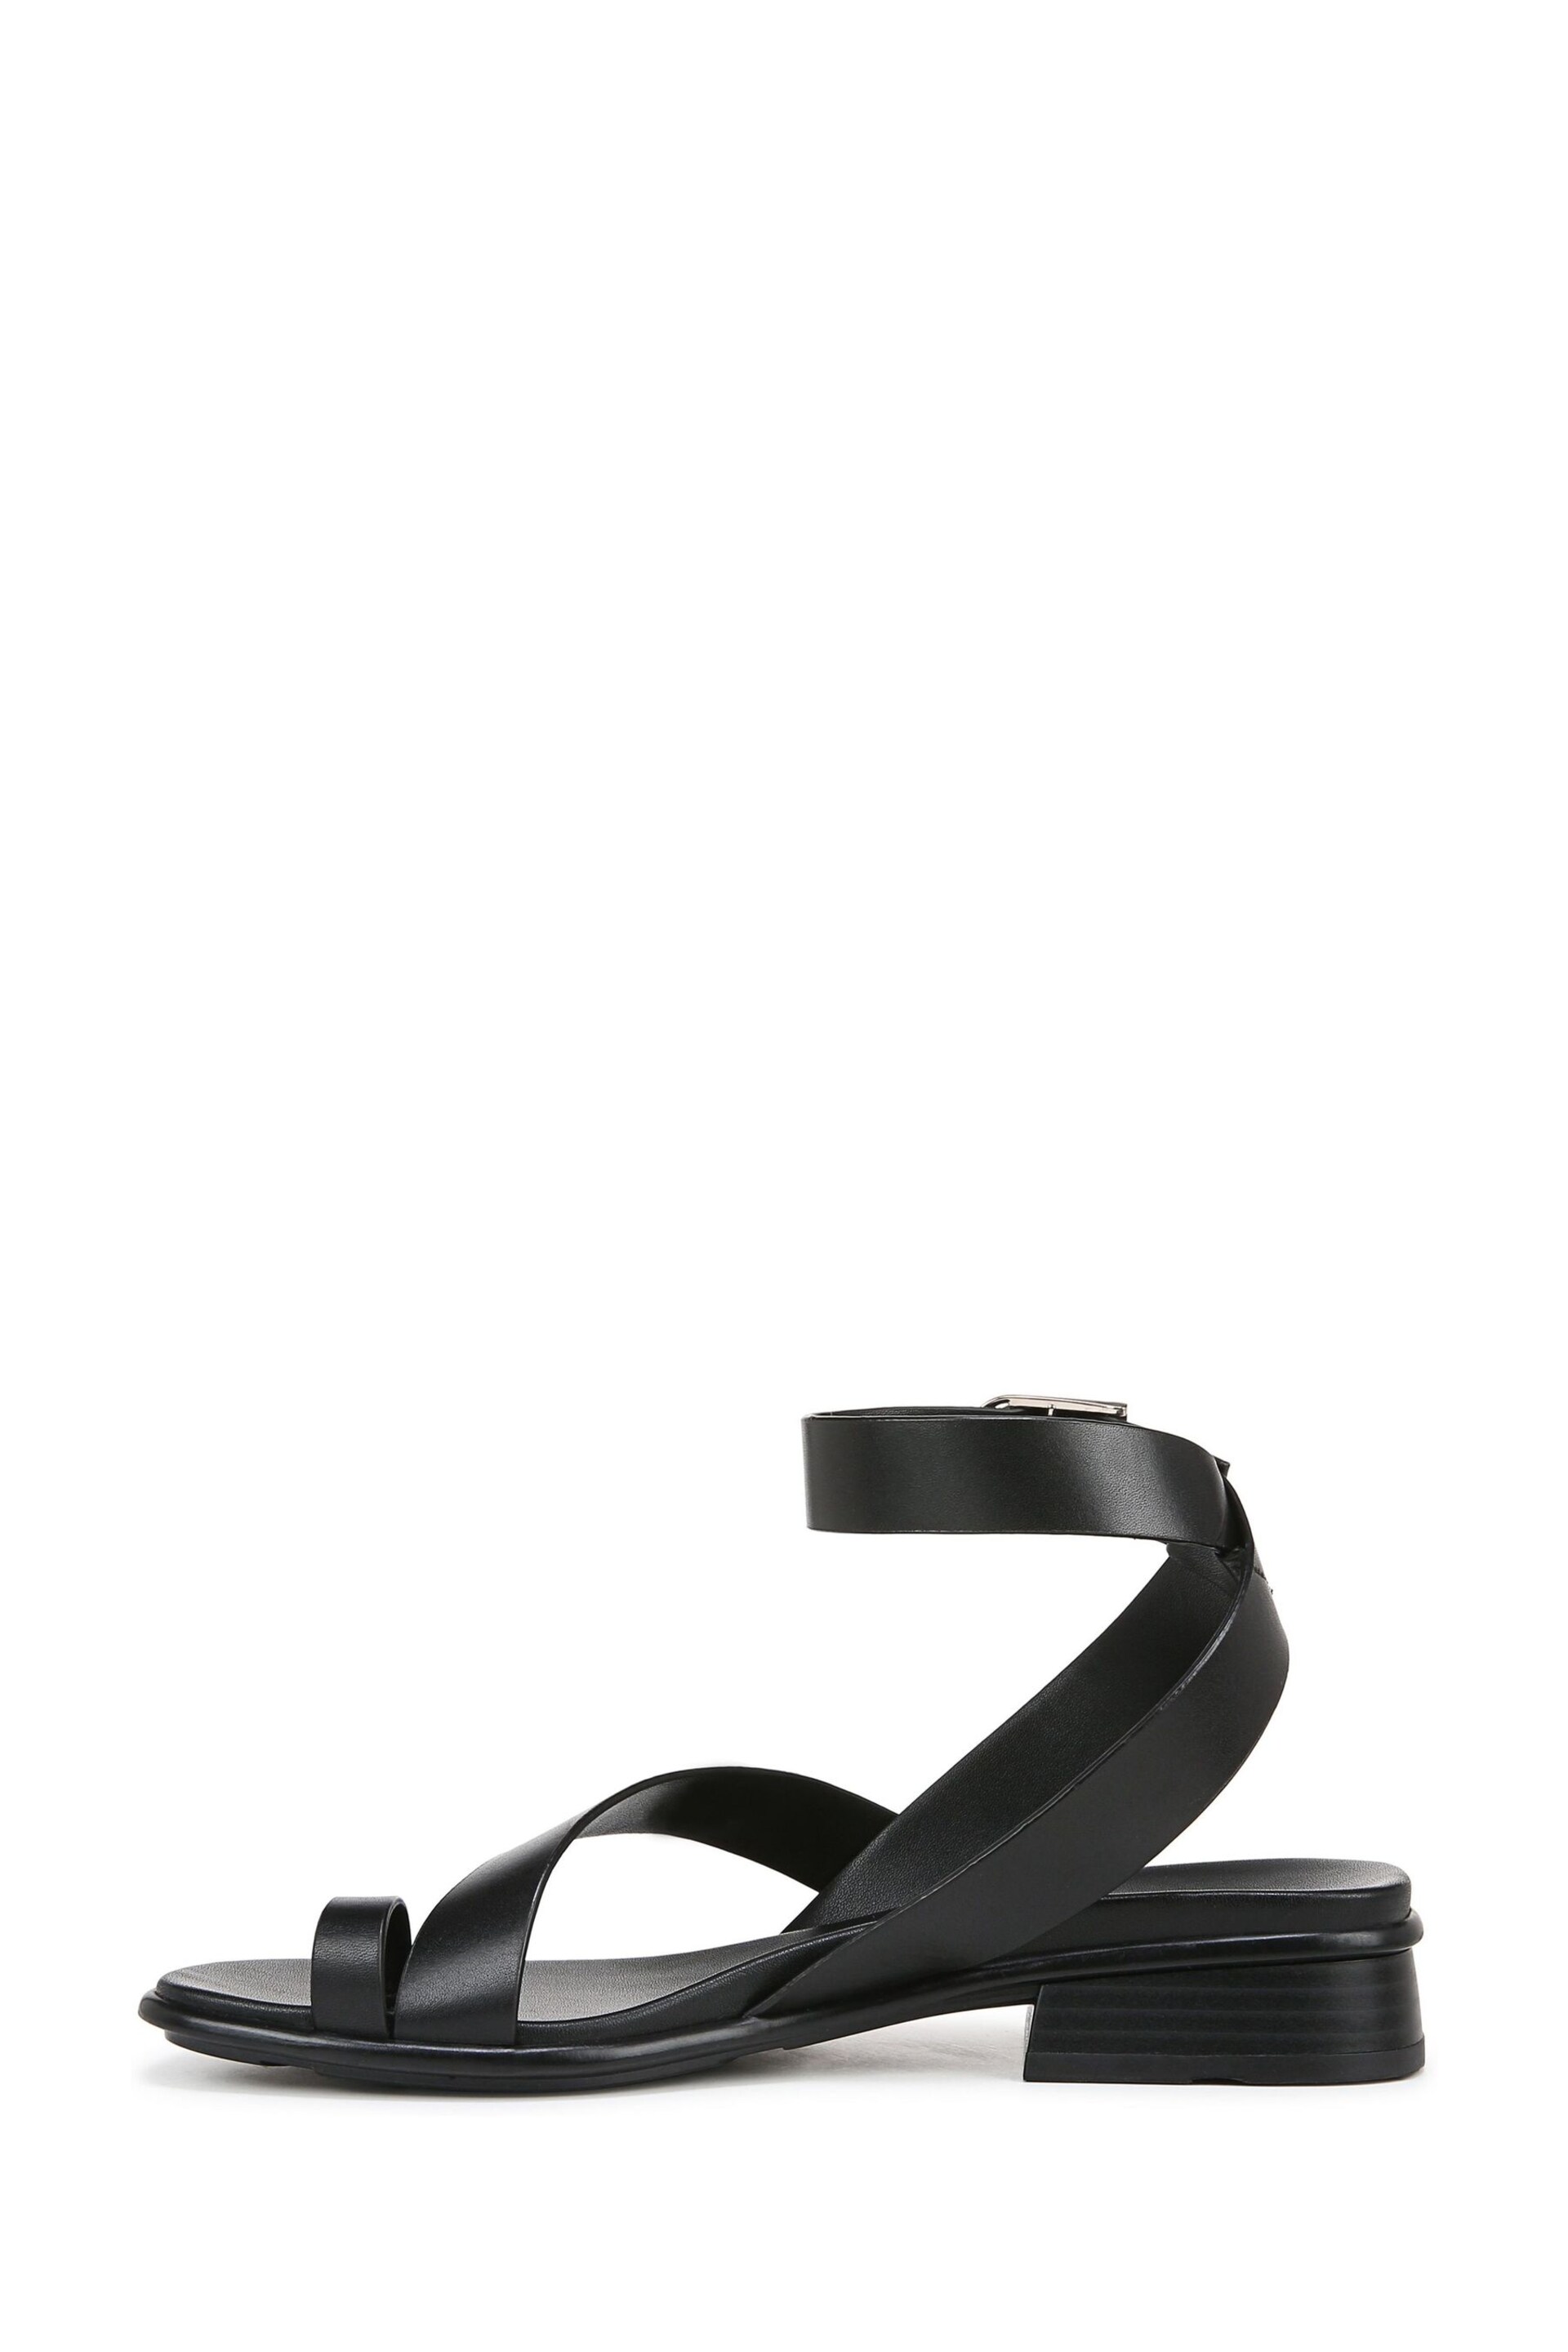 Naturalizer Birch Ankle Strap Sandals - Image 2 of 7